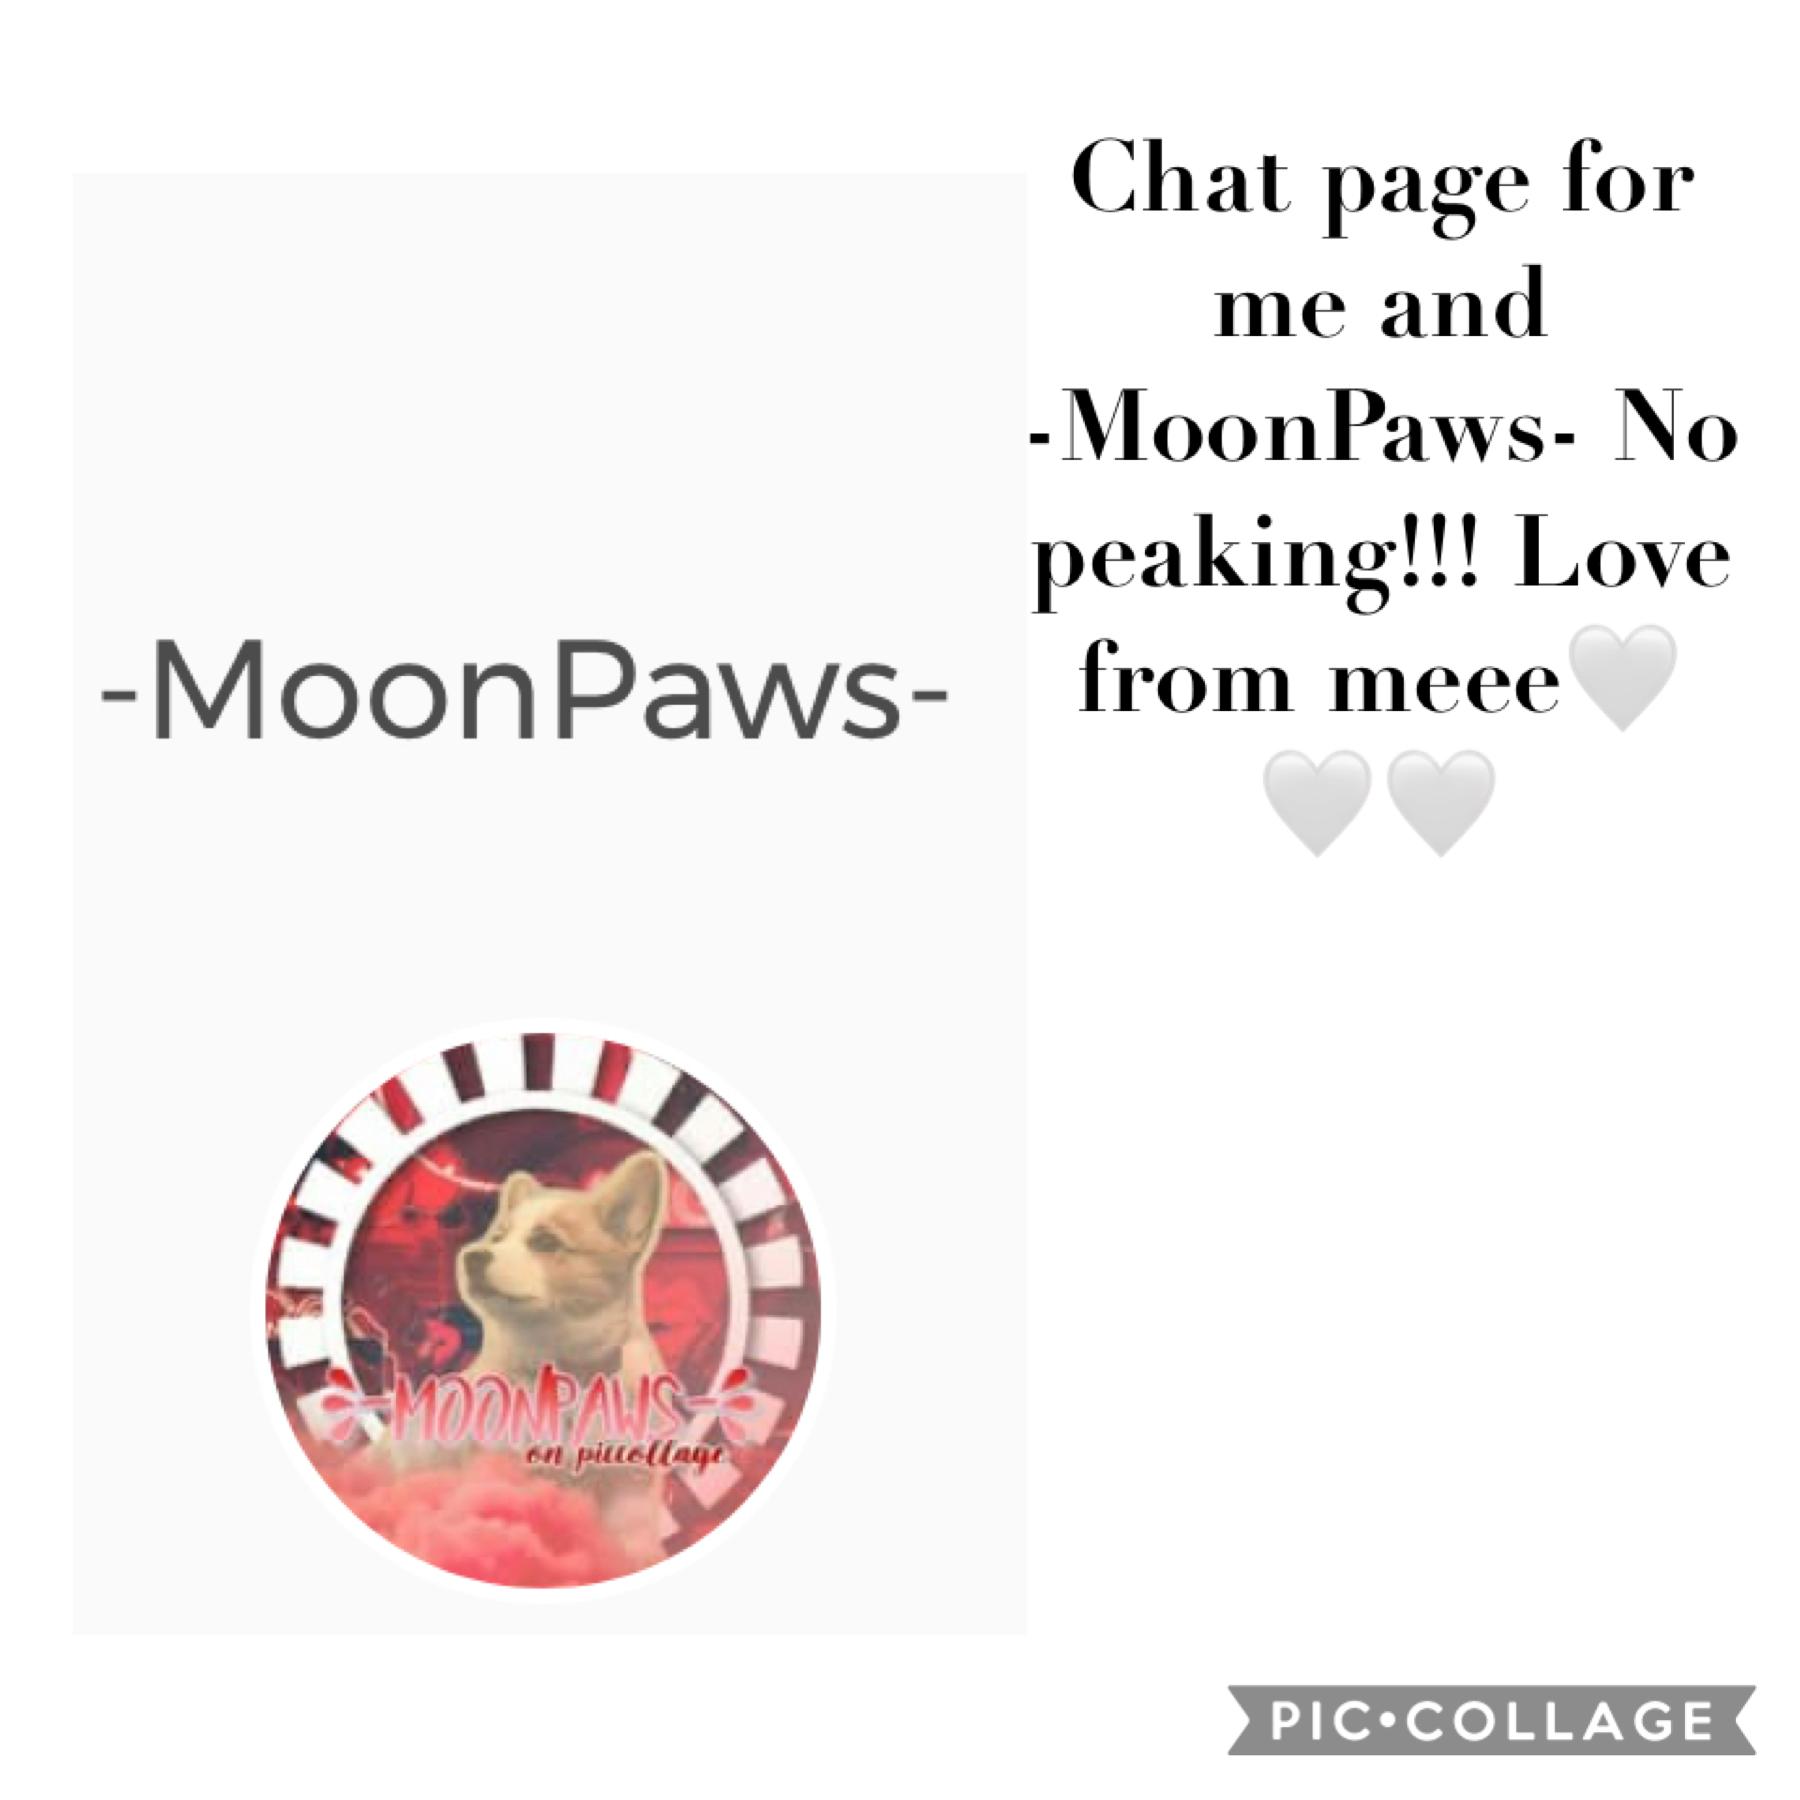 Chat page !! No peaking !!